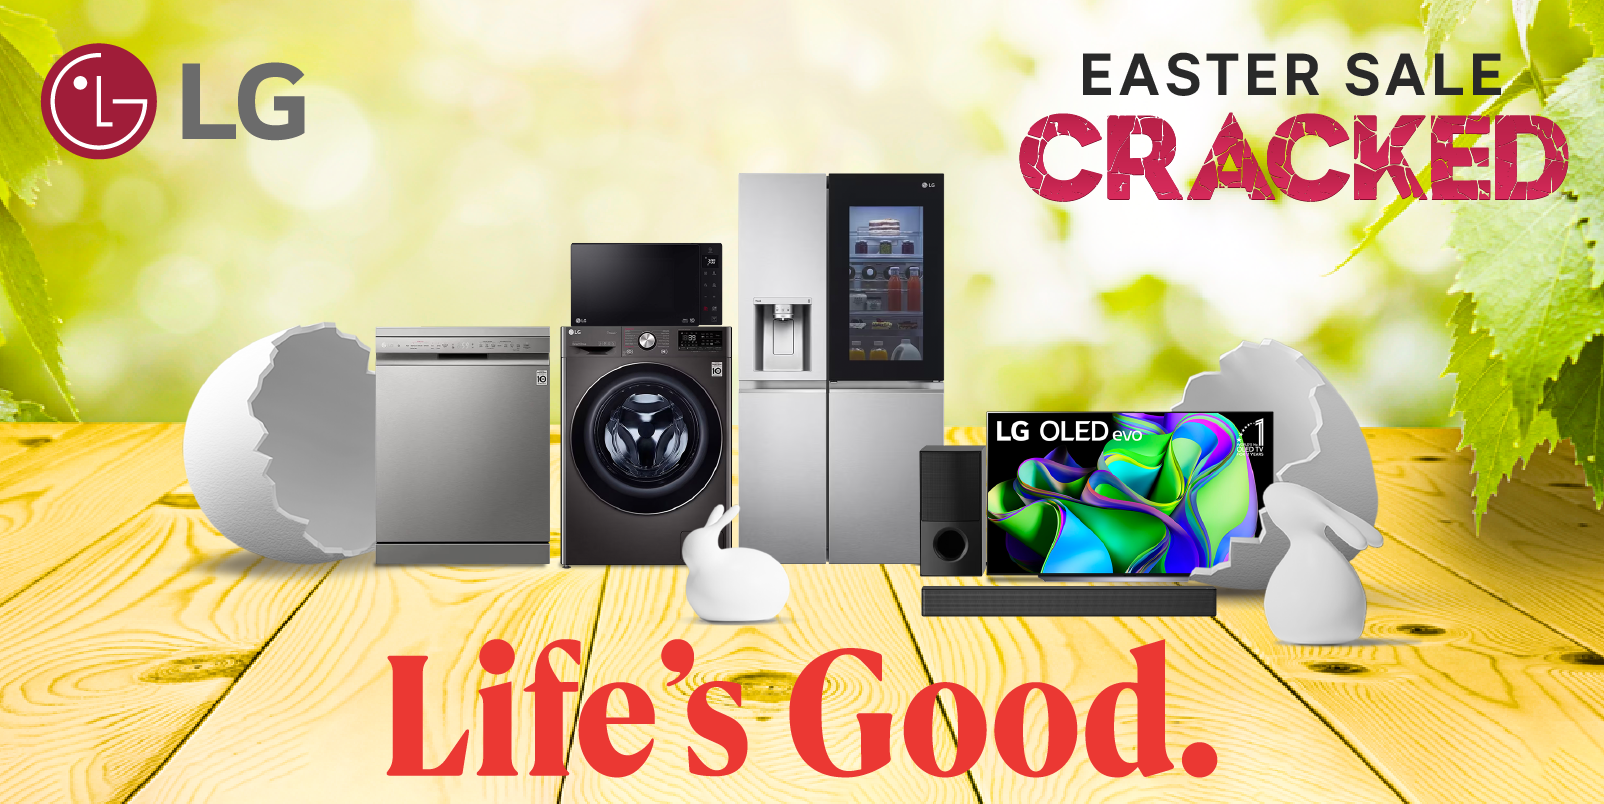 LG Easter Promotion Tanzania